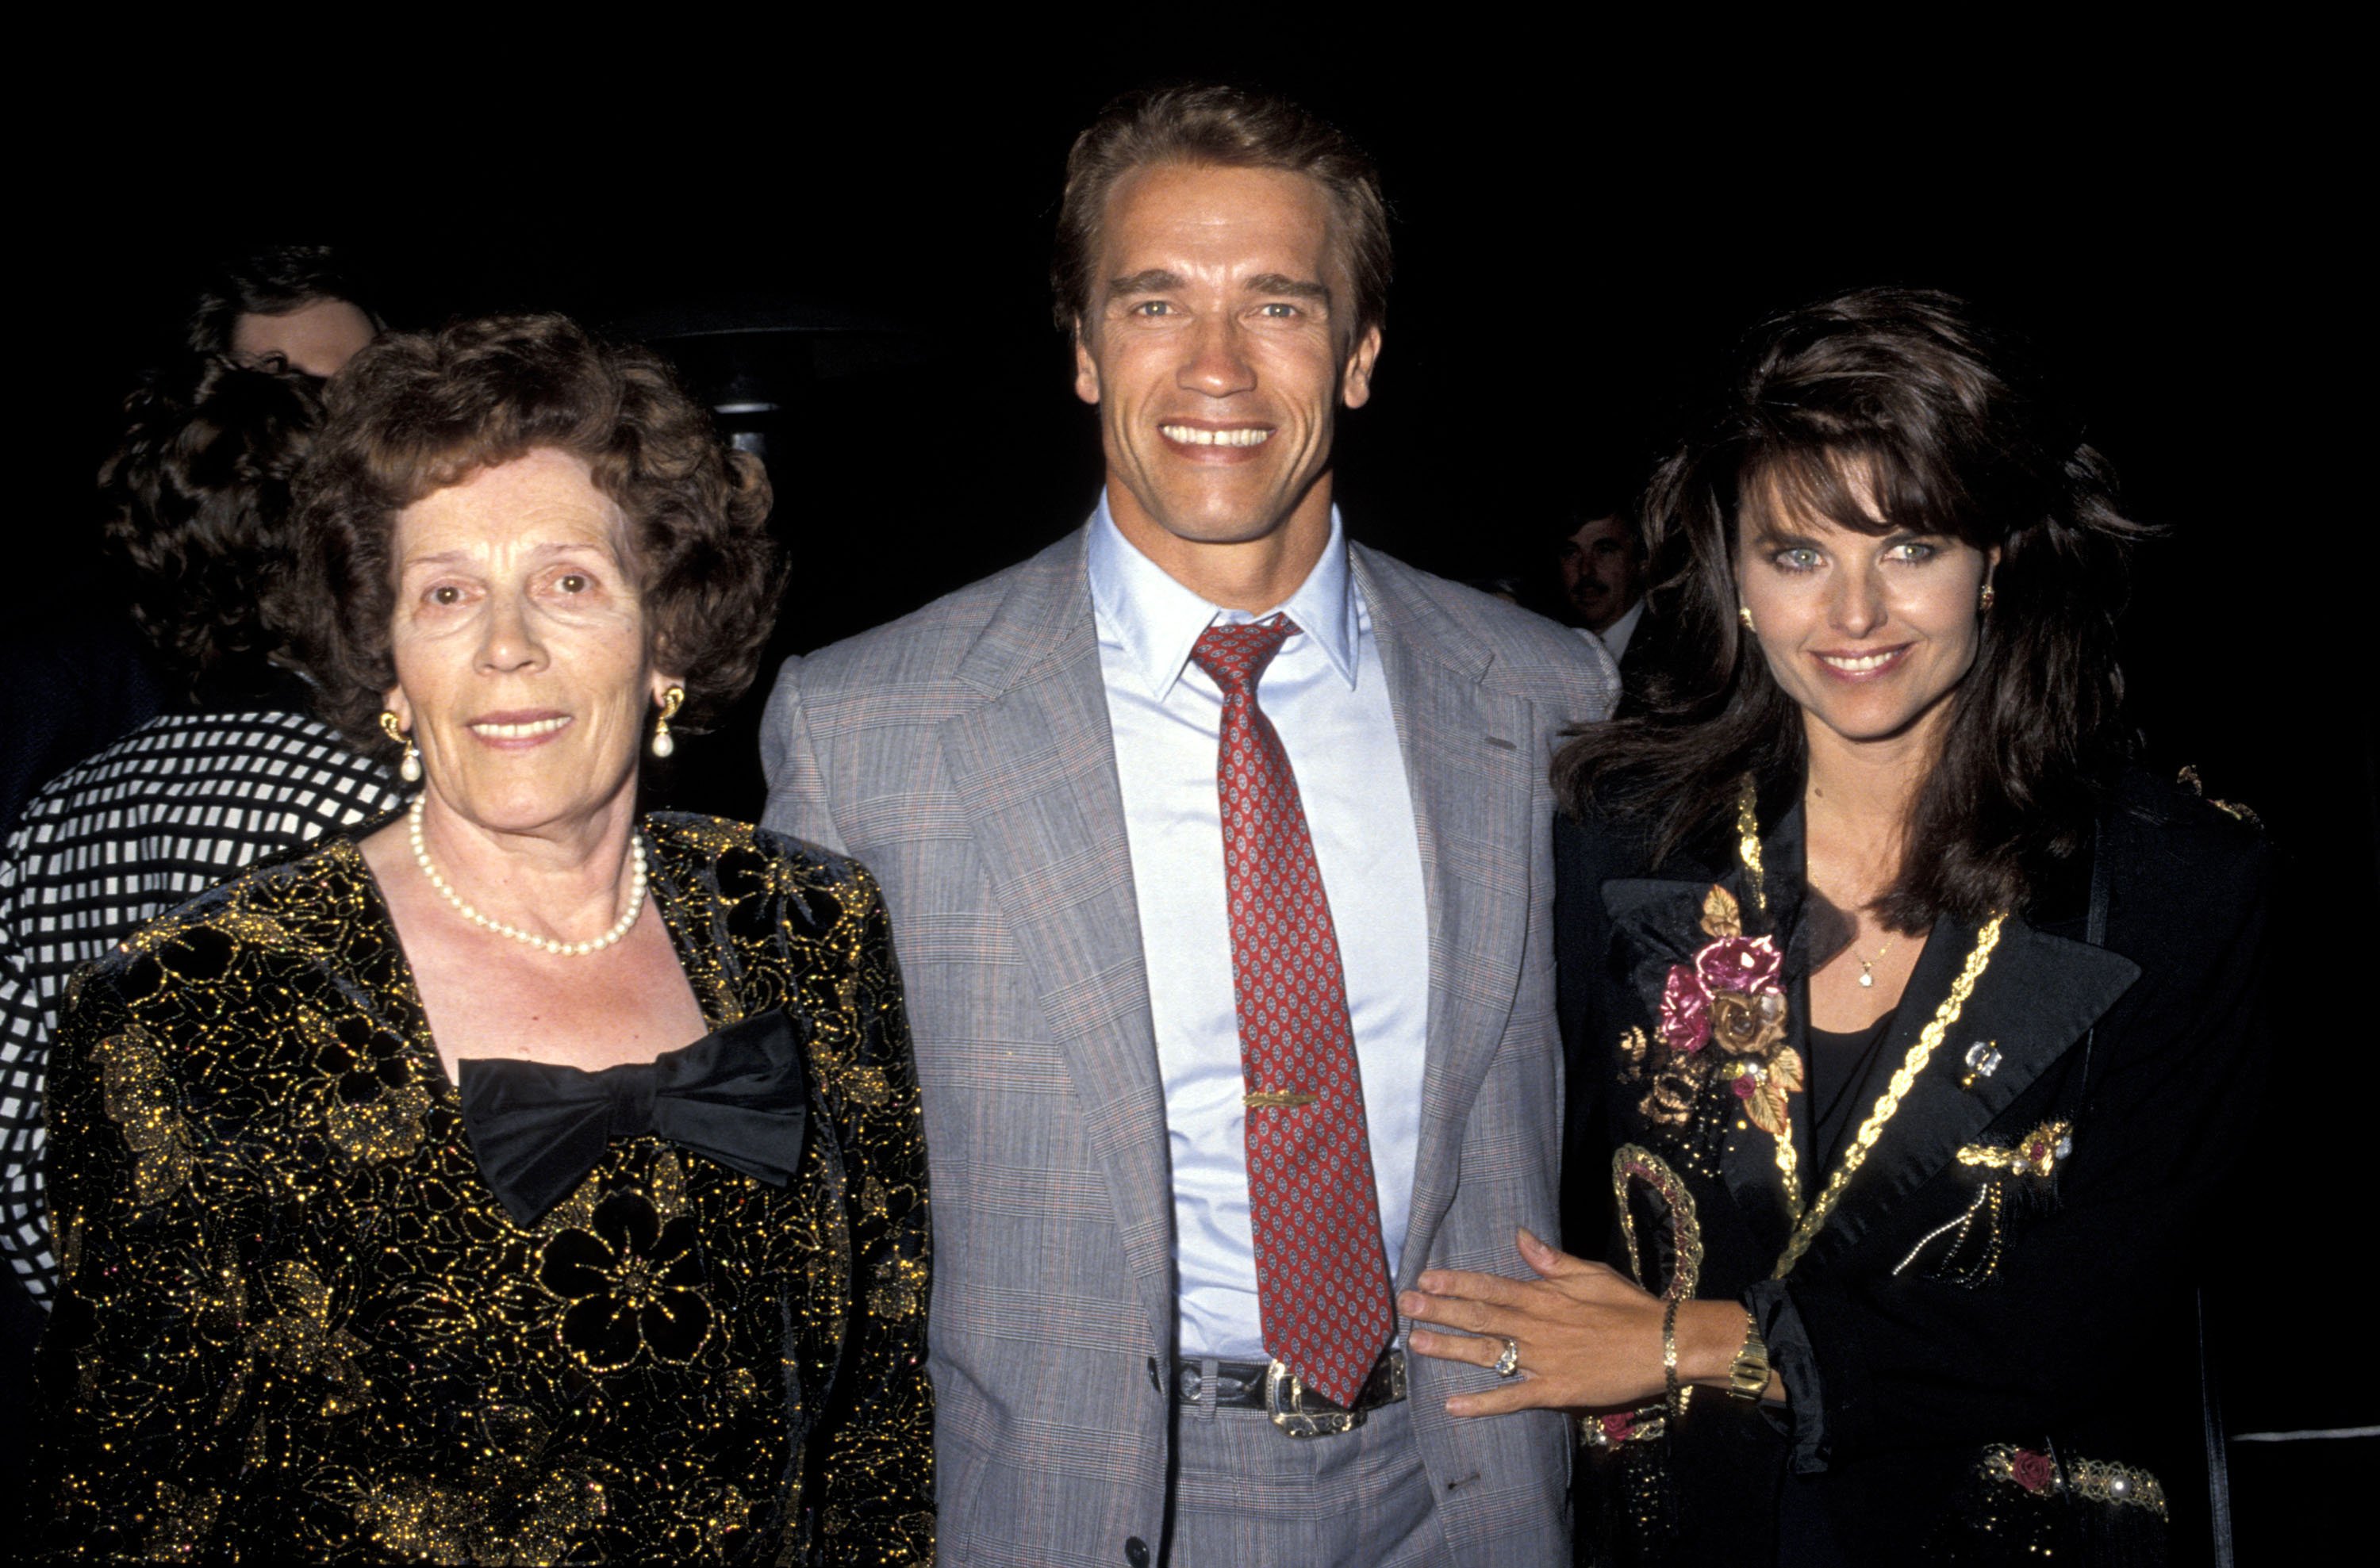 Arnold Schwarzenegger, Maria Shriver, and Aurelia Schwarzenegger at the world premiere of "Total Recall," in Hollywood, California on May 31, 1990 | Source: Getty Images